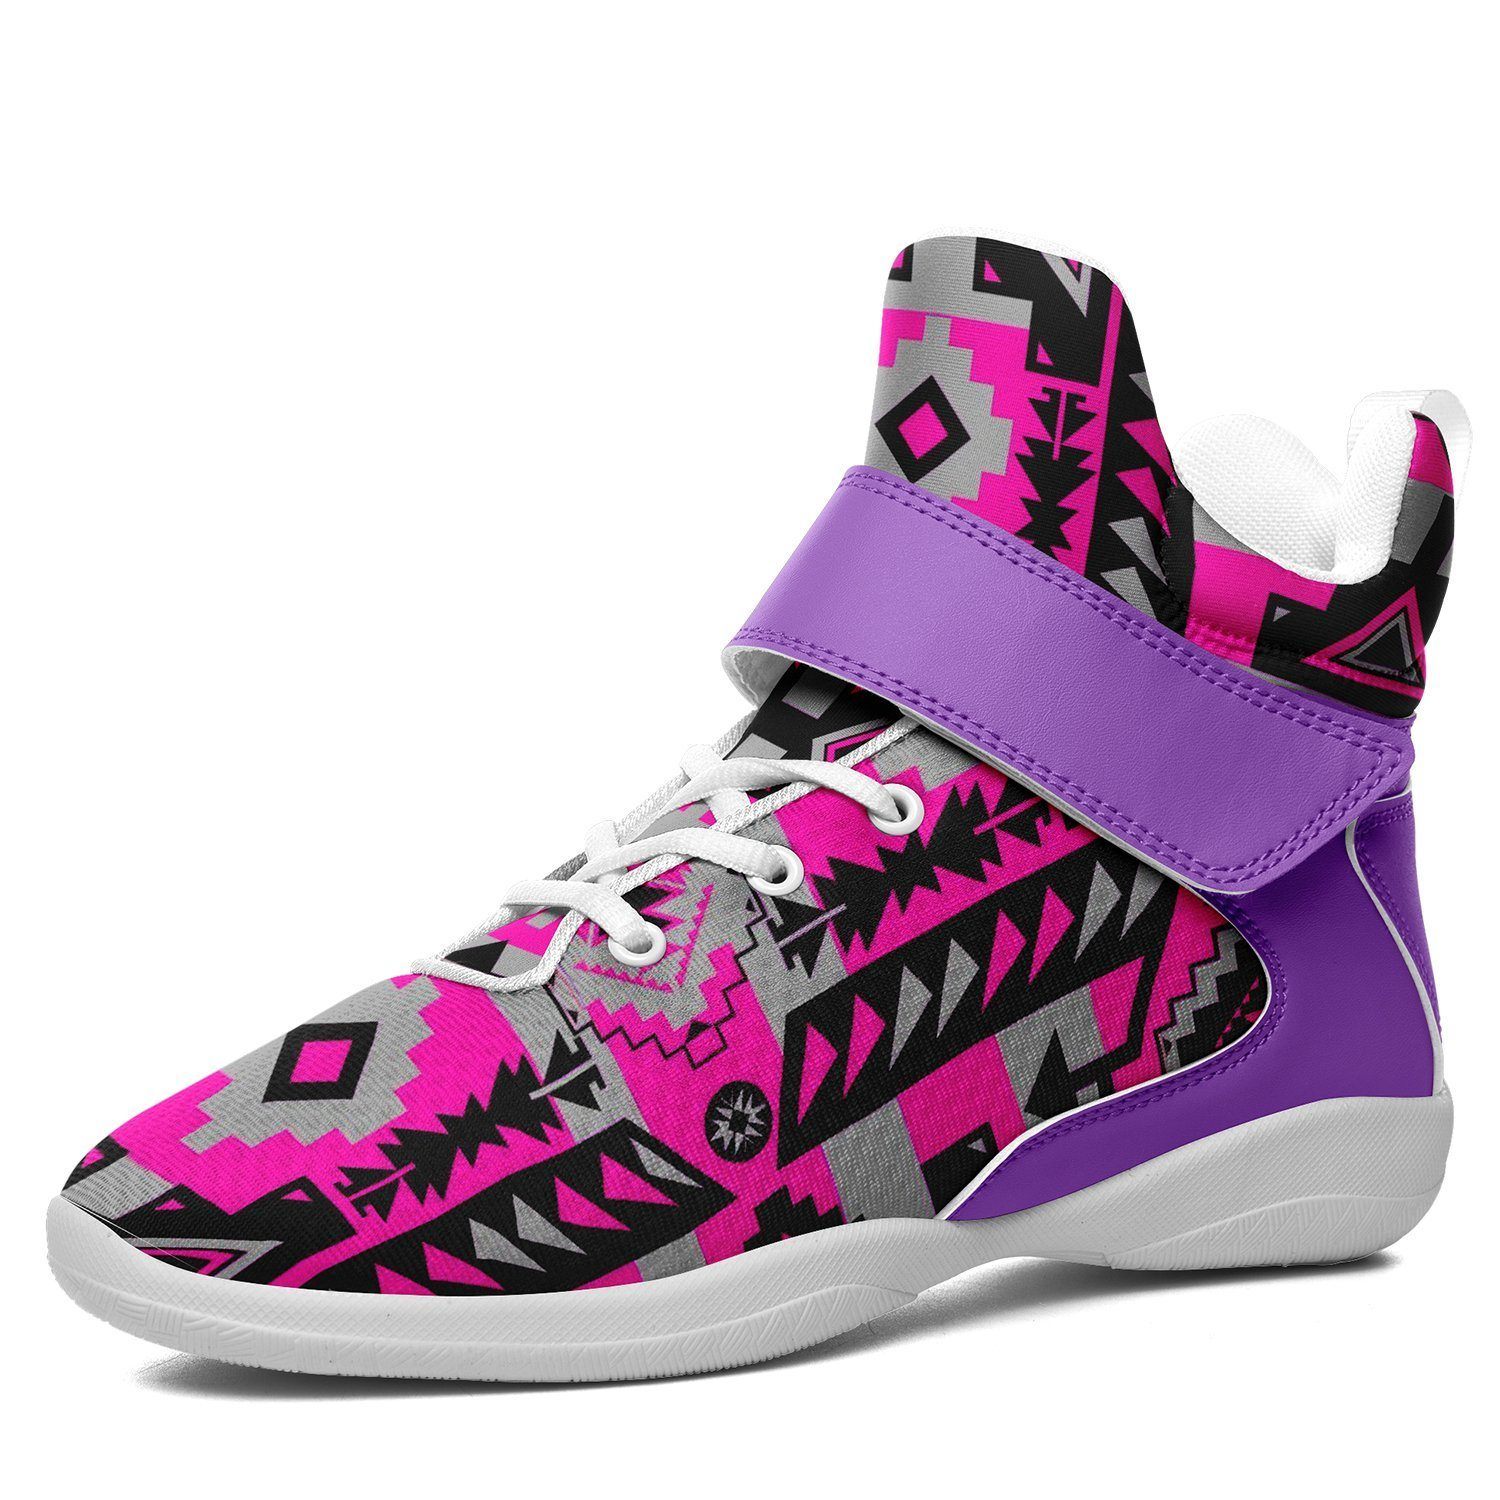 Chiefs Mountain Sunset Ipottaa Basketball / Sport High Top Shoes - White Sole 49 Dzine US Men 7 / EUR 40 White Sole with Lavender Strap 